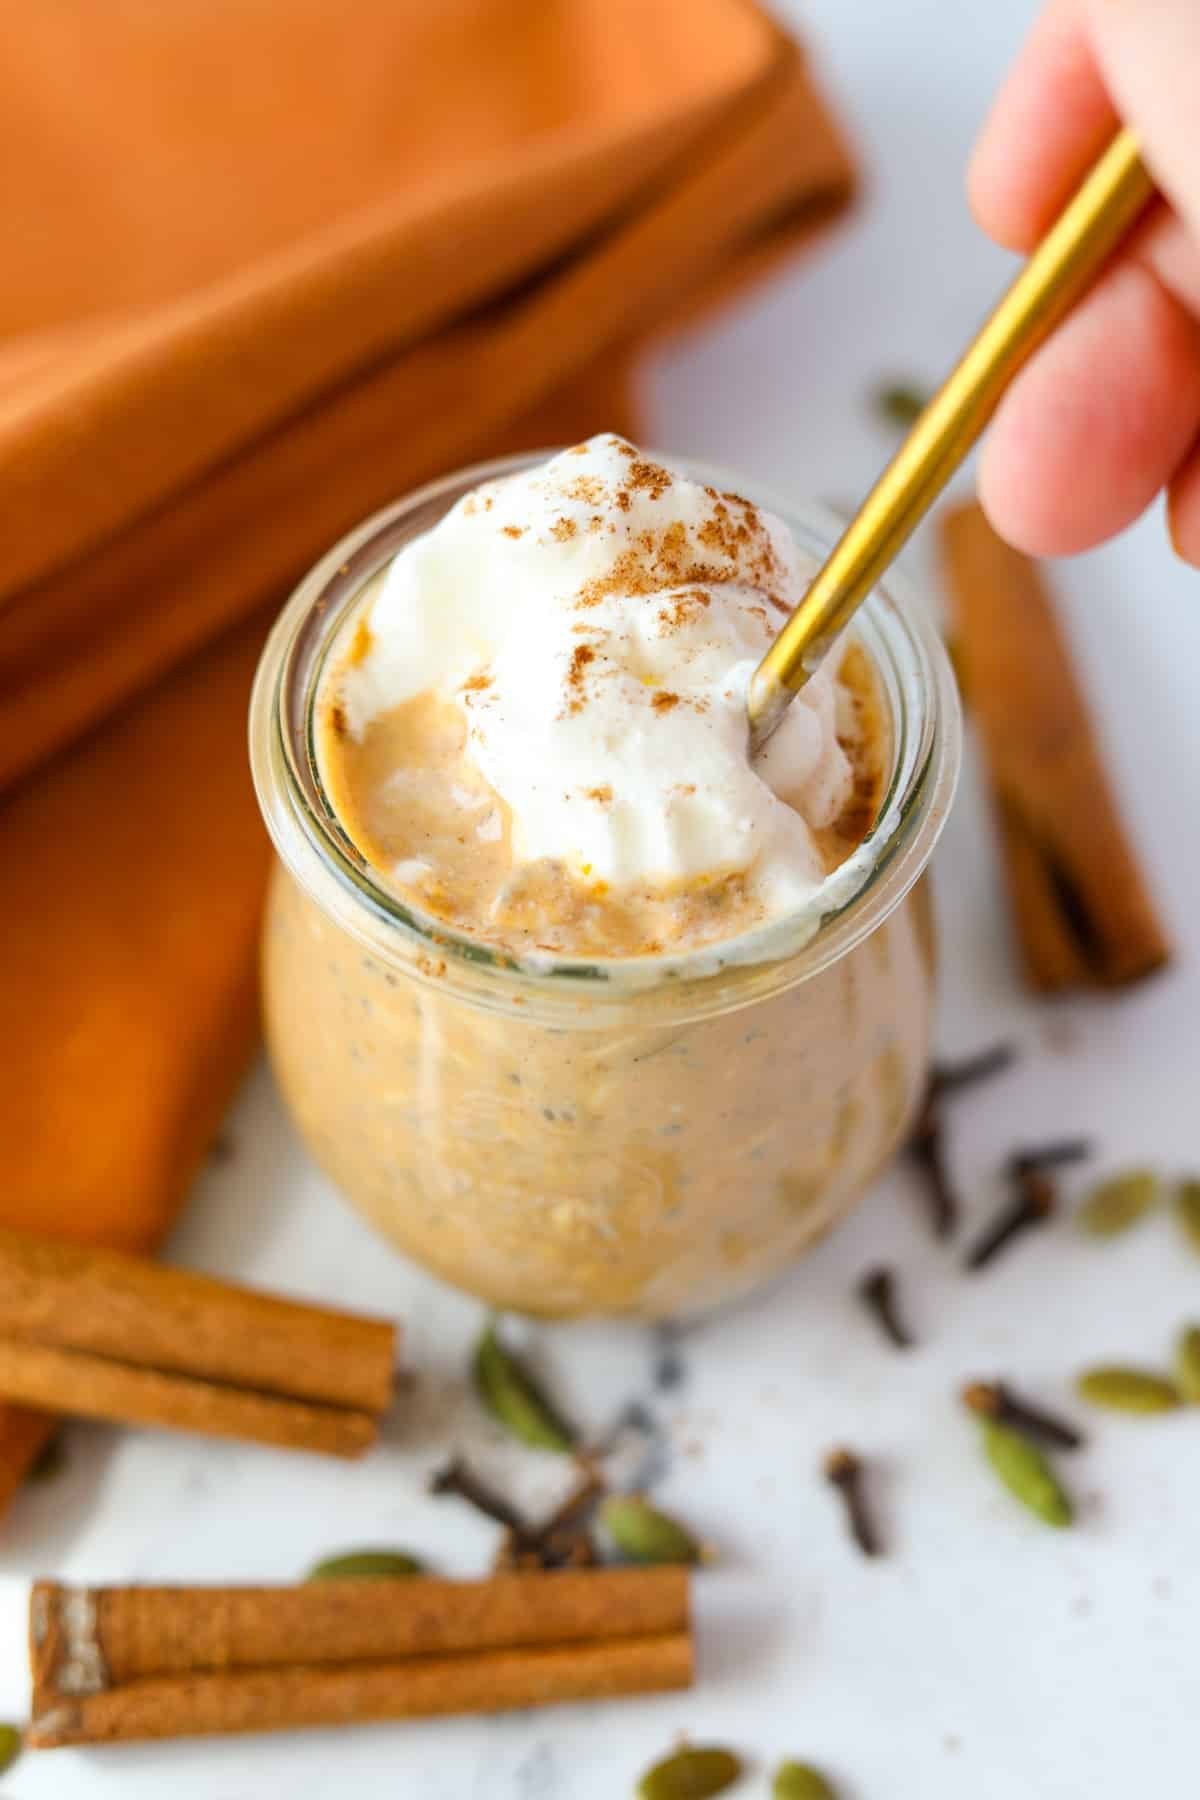 A spoon taking a portion from a jar of pumpkin overnight oatmeal.